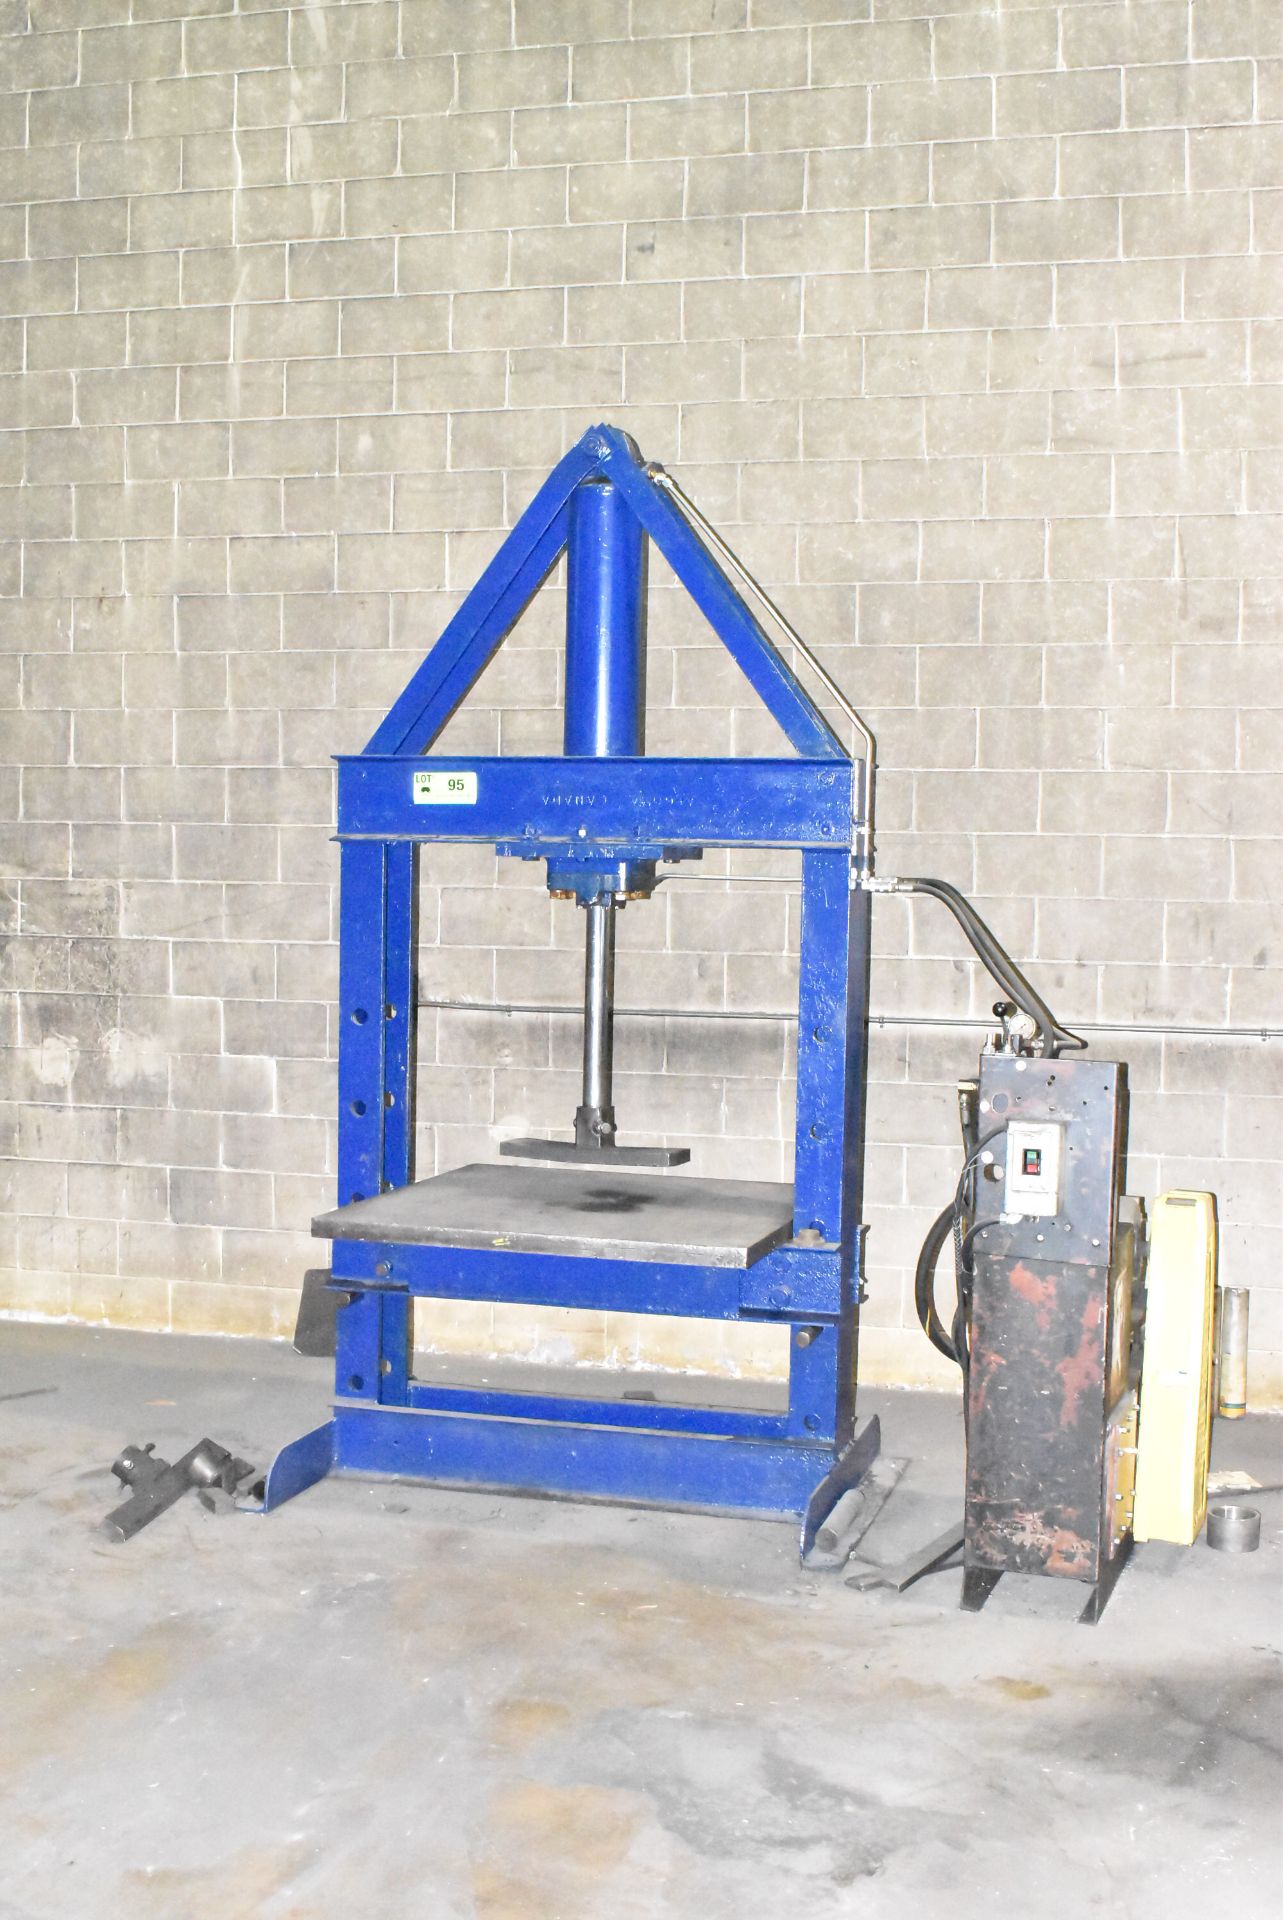 MFG UNKNOWN 35TON CAPACITY ELECTRO-HYDRAULIC SHOP PRESS WITH 45" THROAT, 54" HEIGHT AND 36"